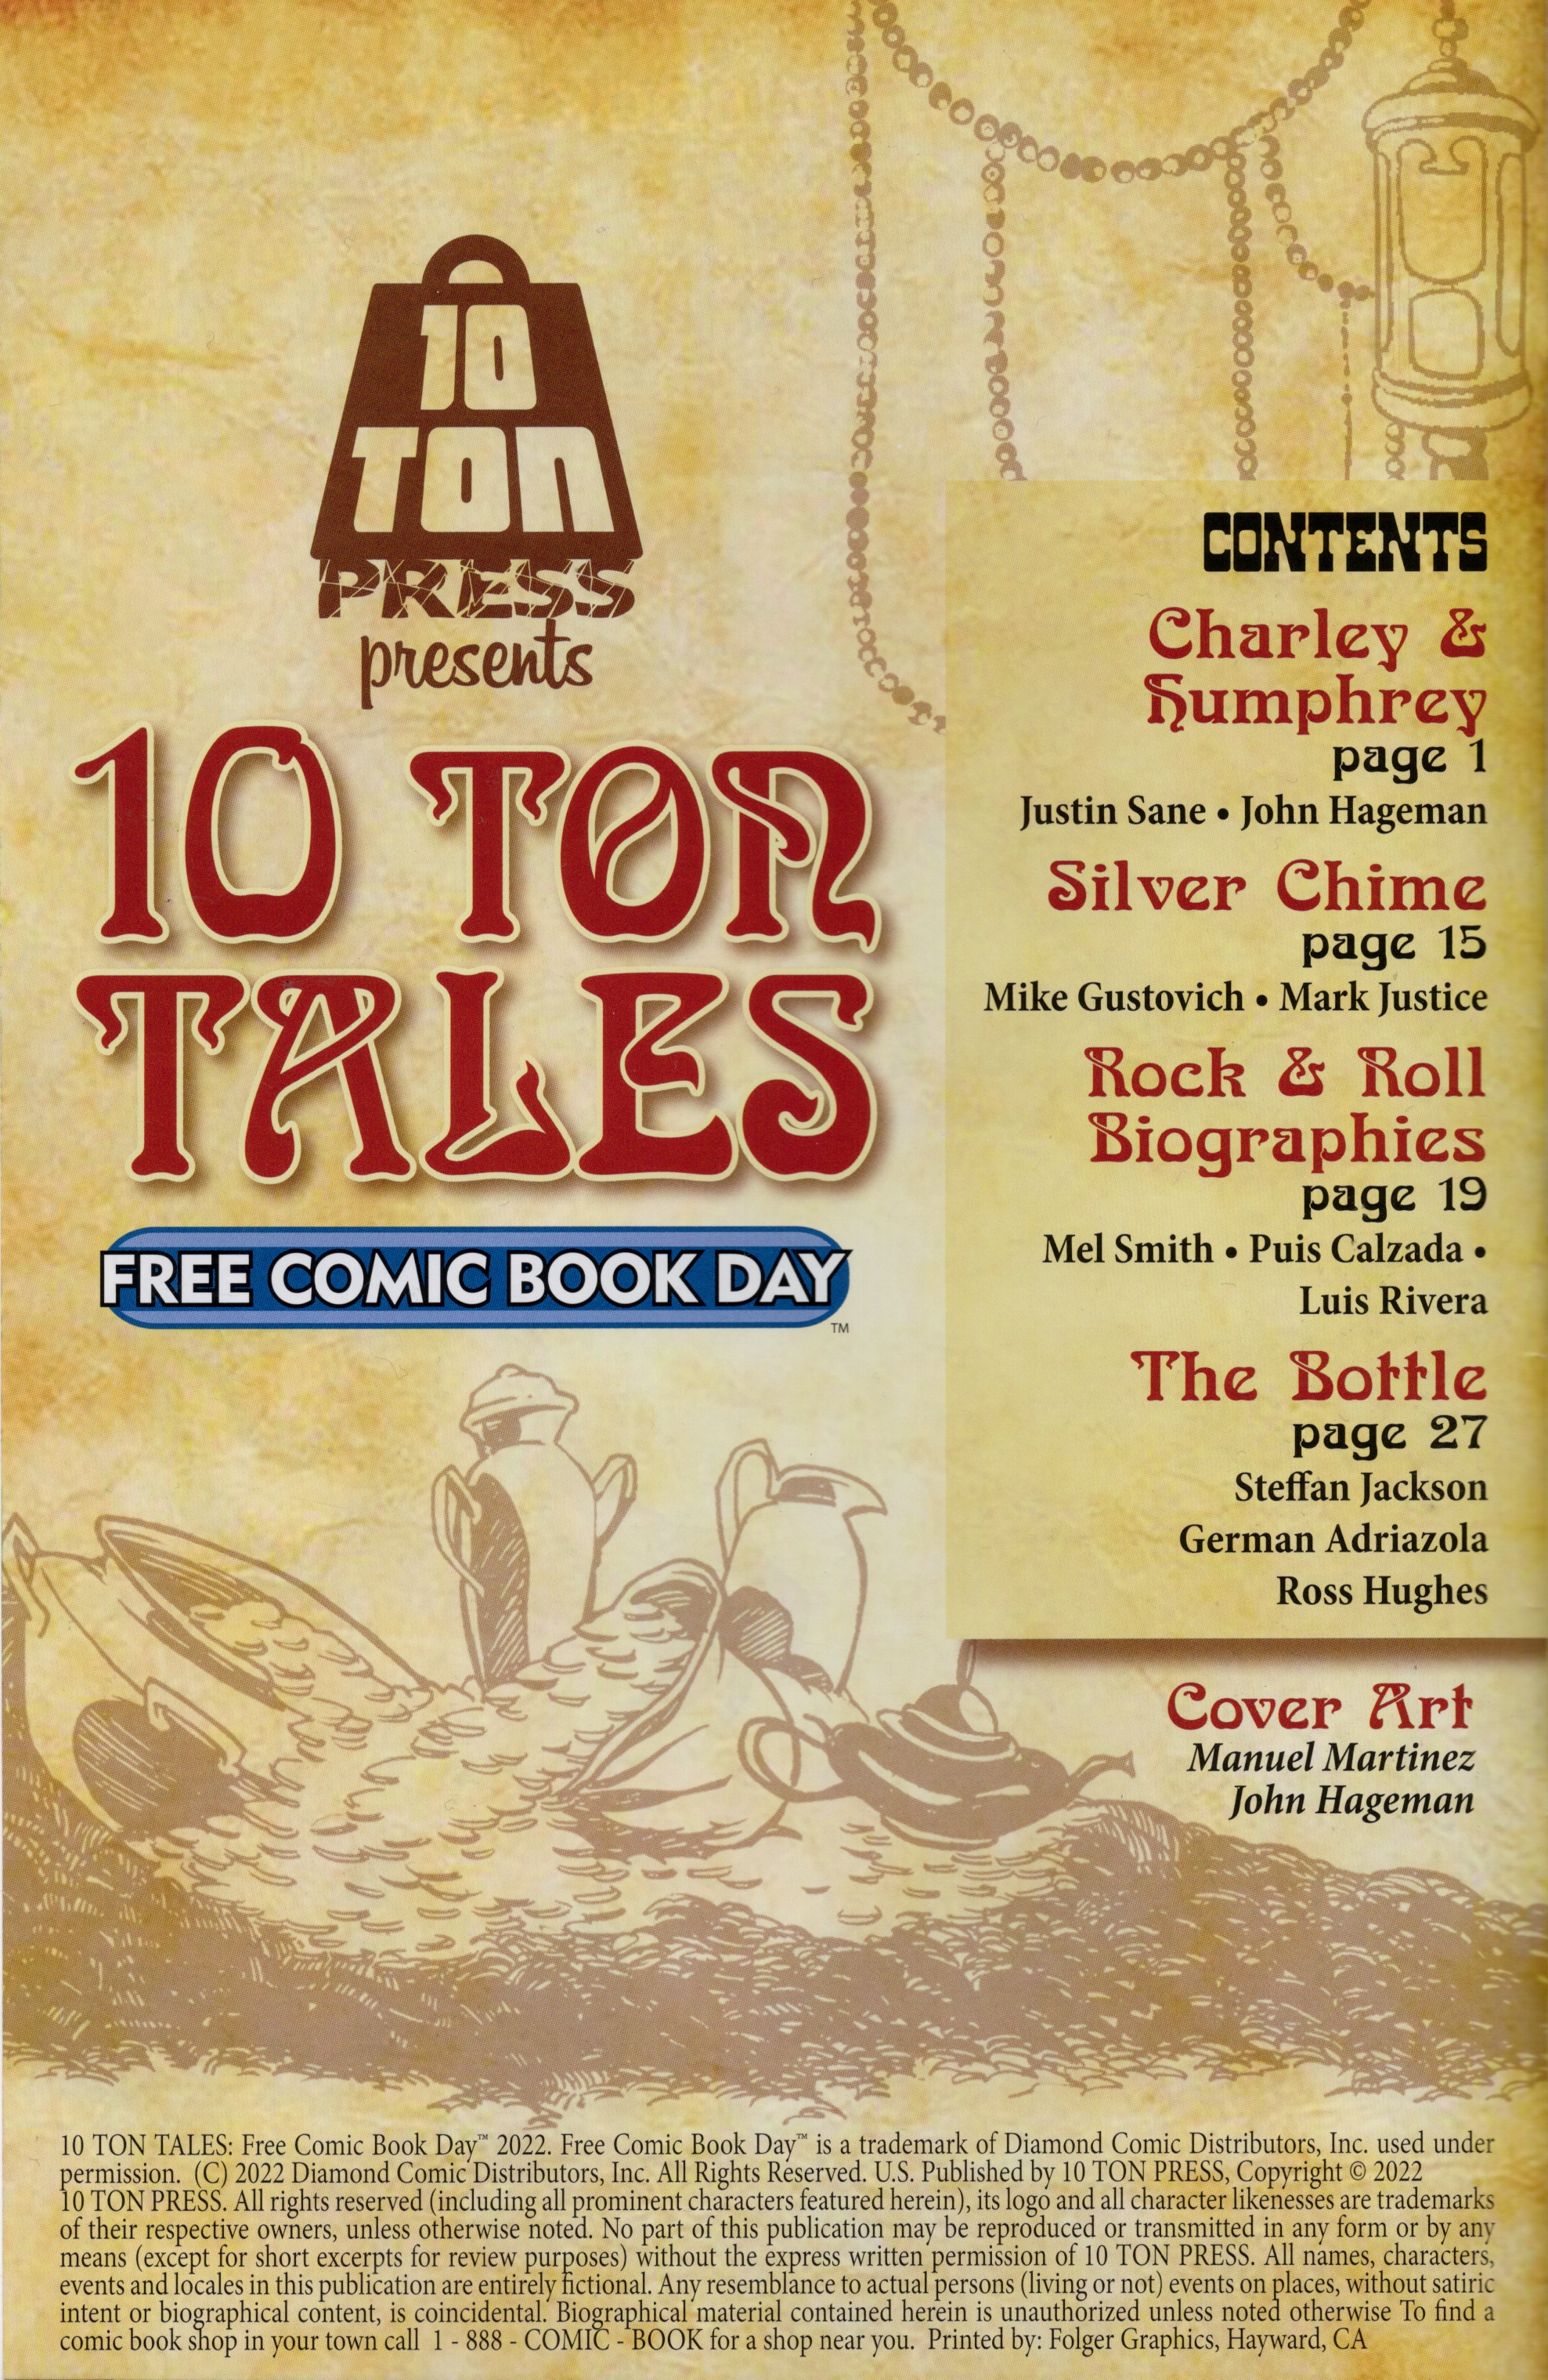 Read online Free Comic Book Day 2022 comic -  Issue # 10 Ton Press 10 Ton Tales - 2